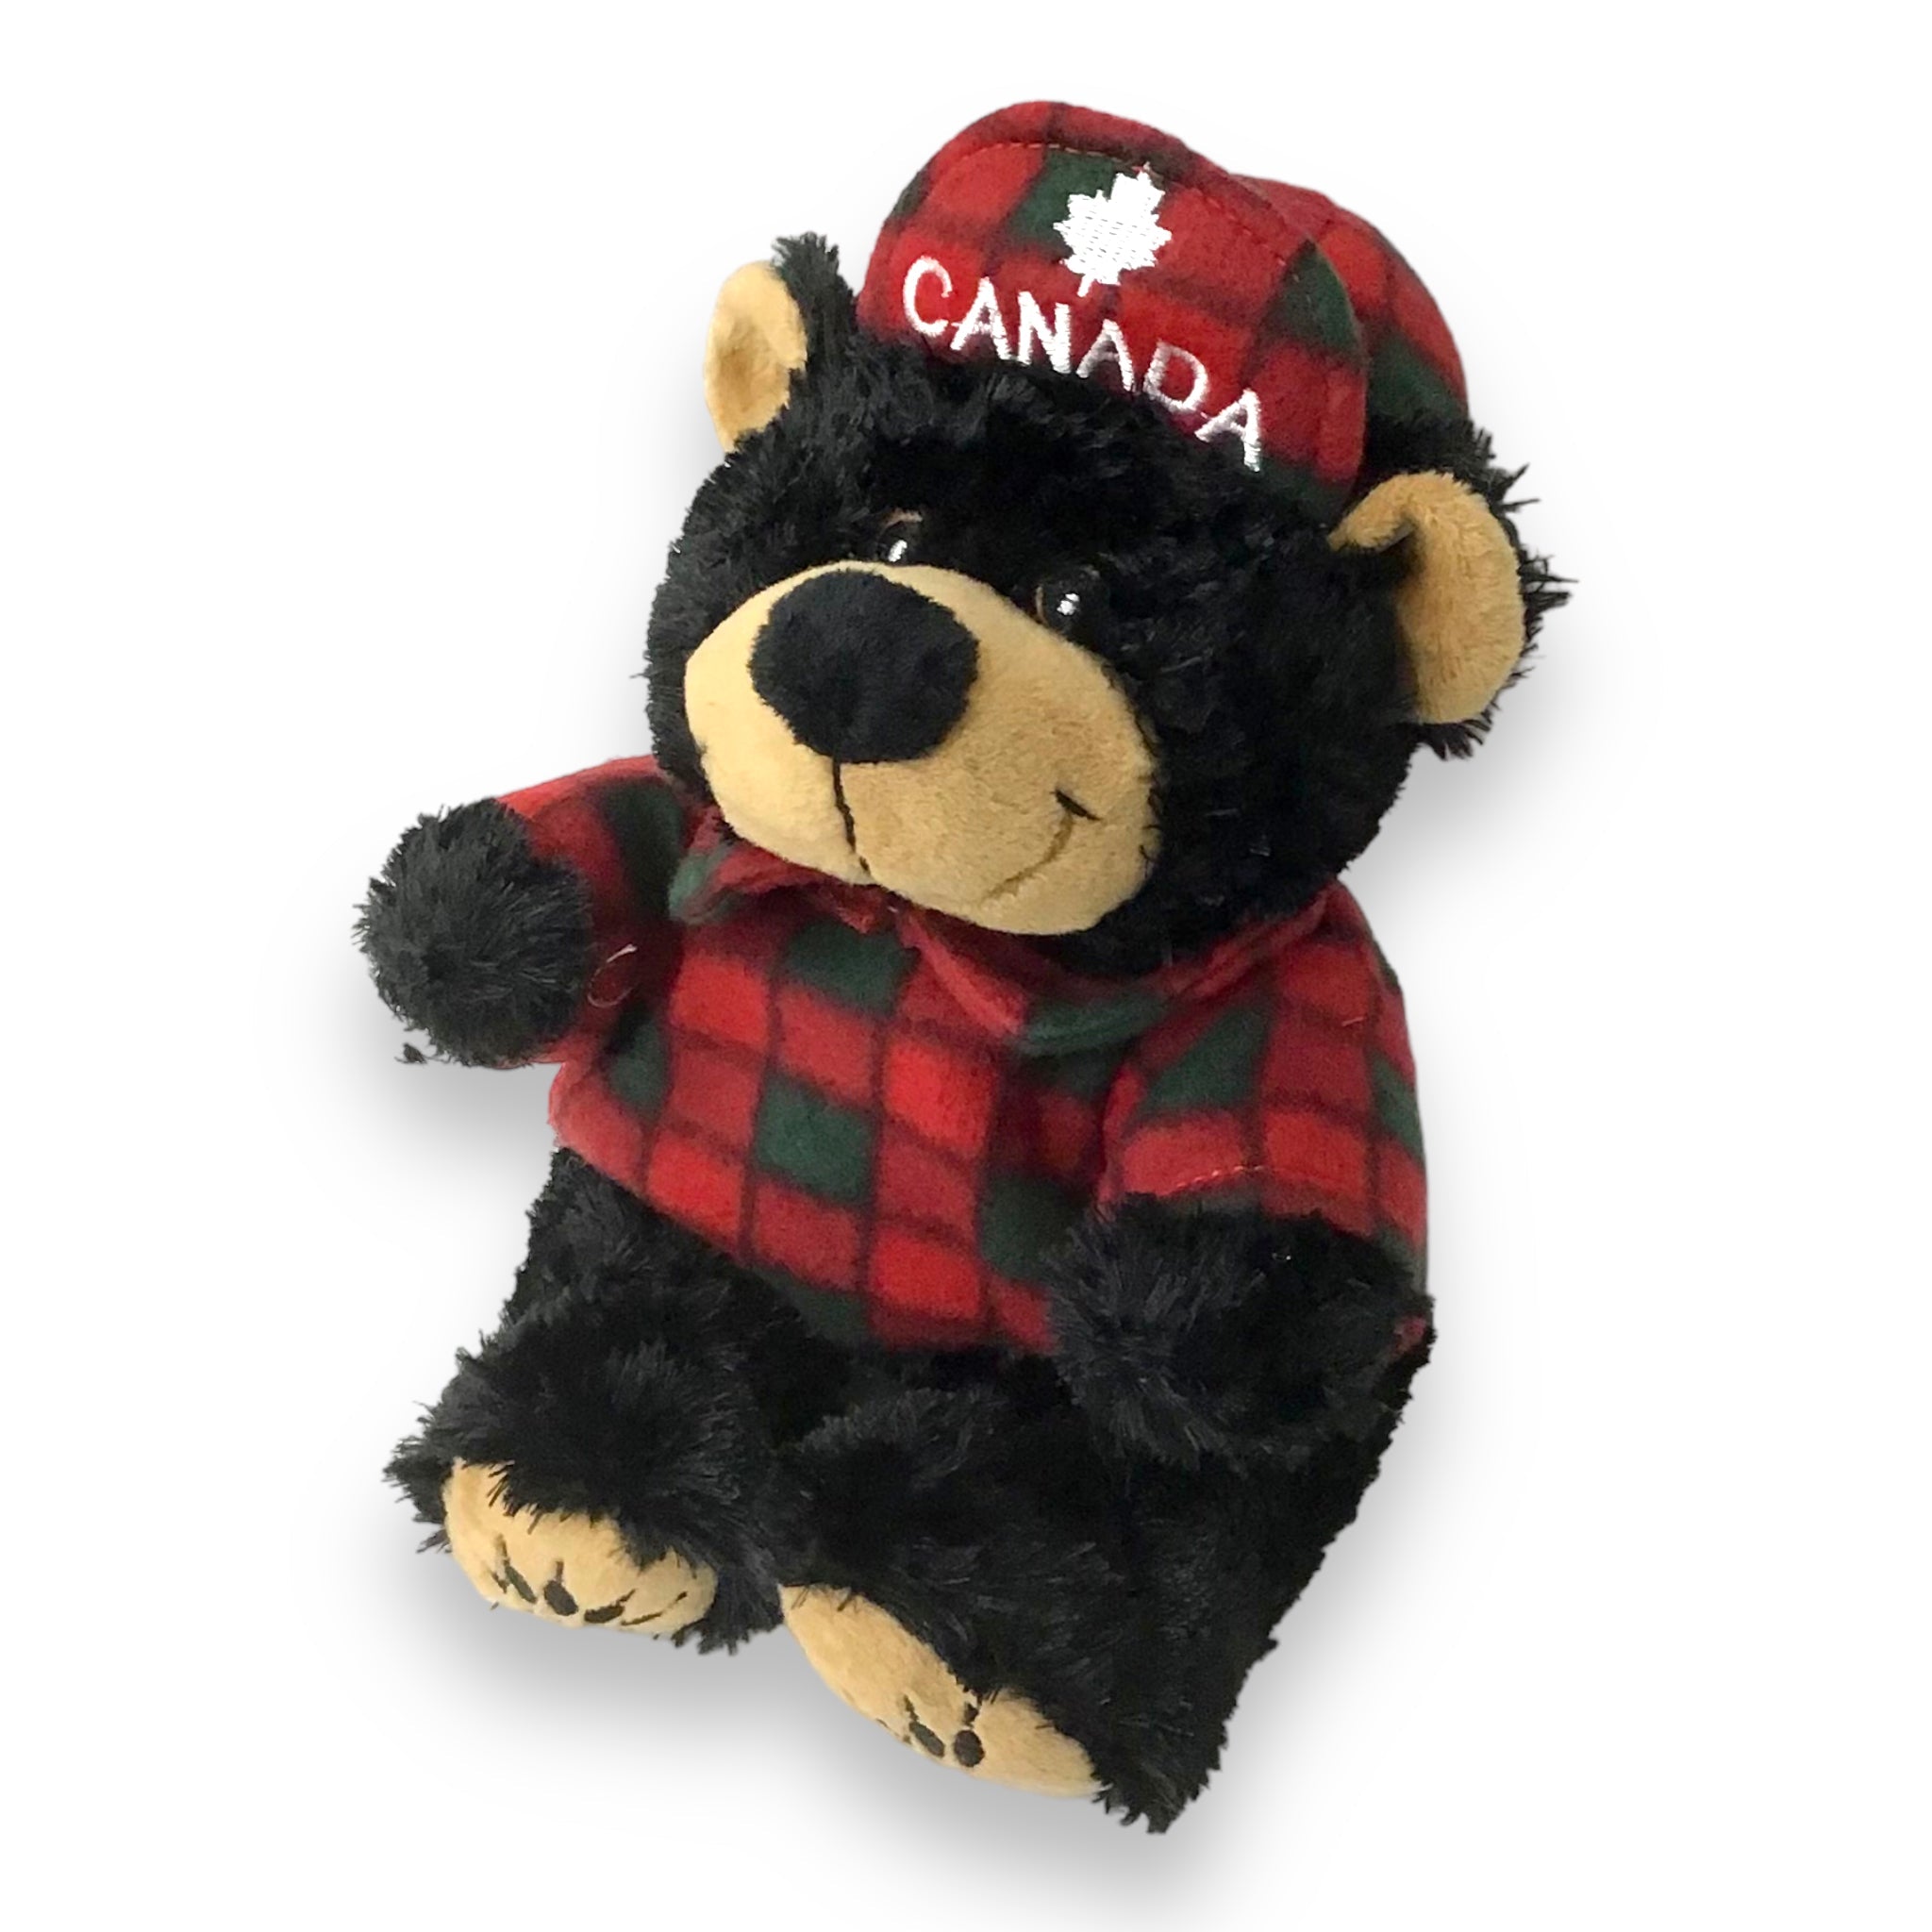 Black Teddy Bear Stuffed Animal Plush with Plaid Red/Green Hat & Sweater Canada Maple Embroidery